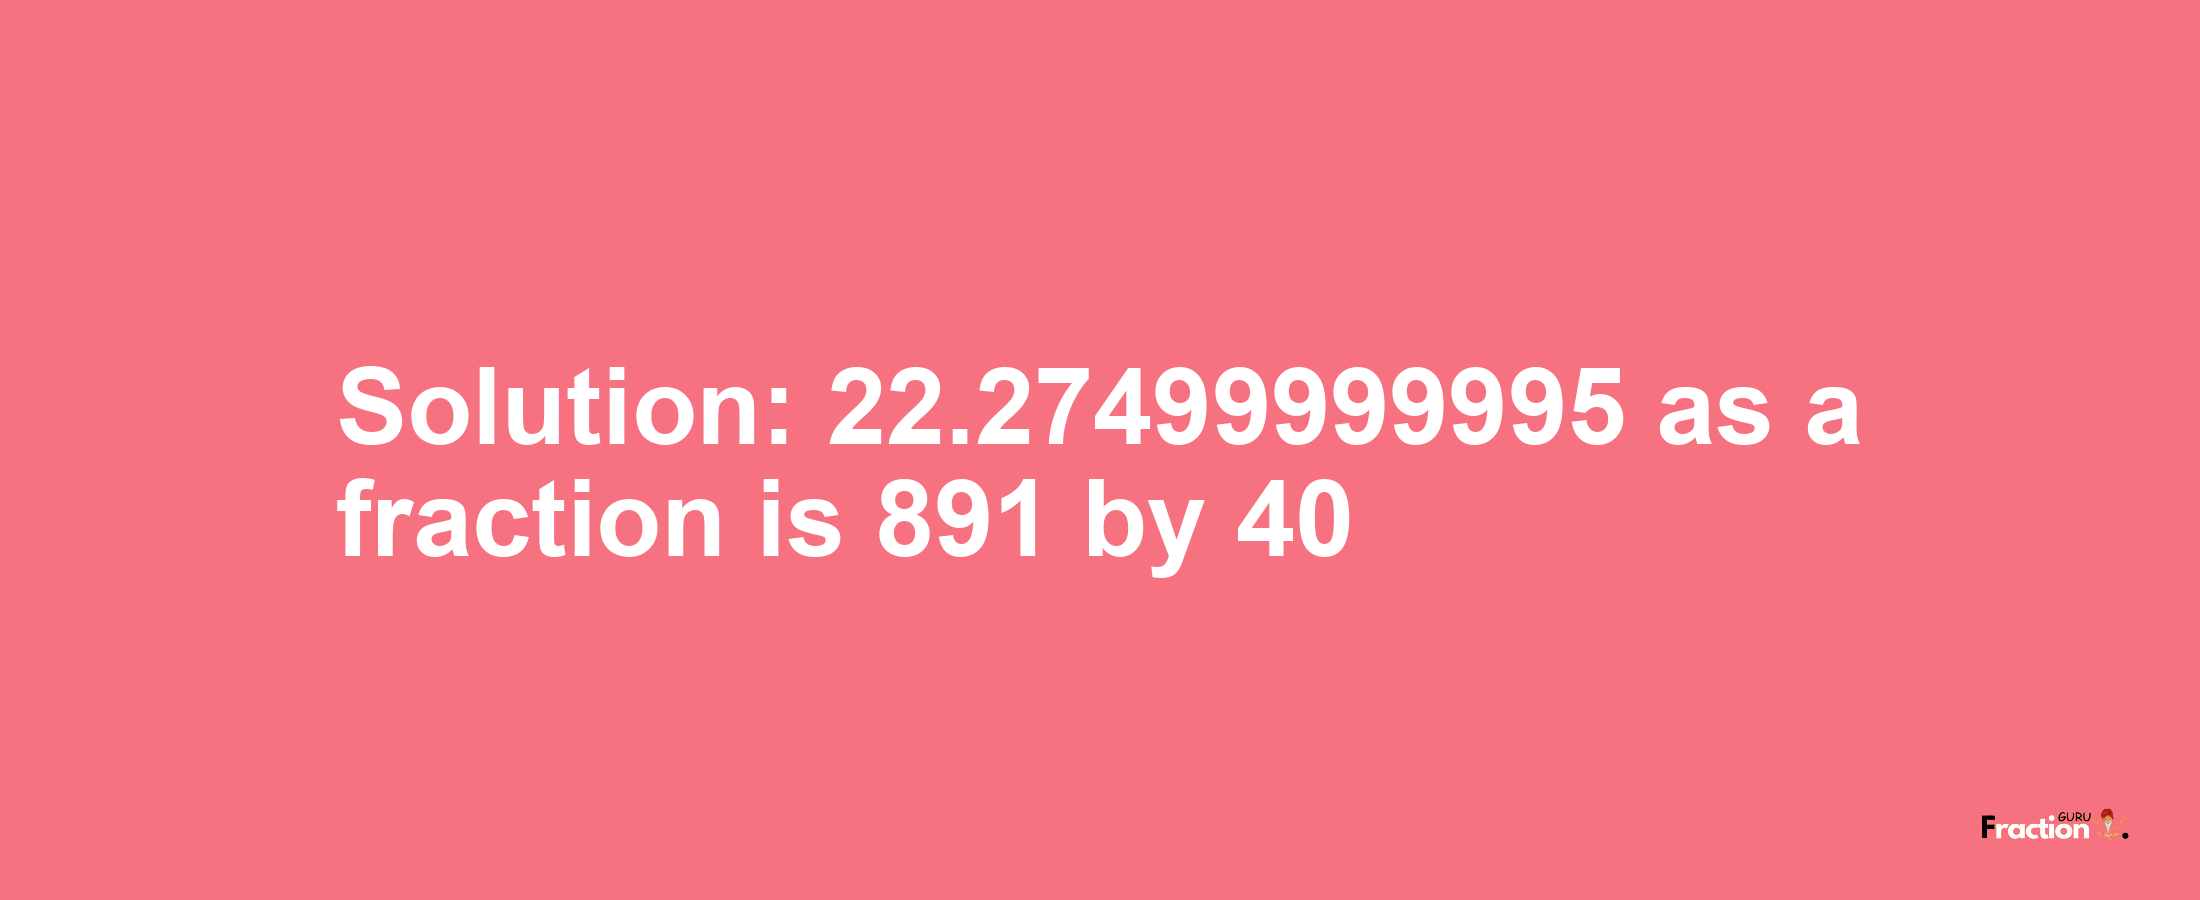 Solution:22.27499999995 as a fraction is 891/40